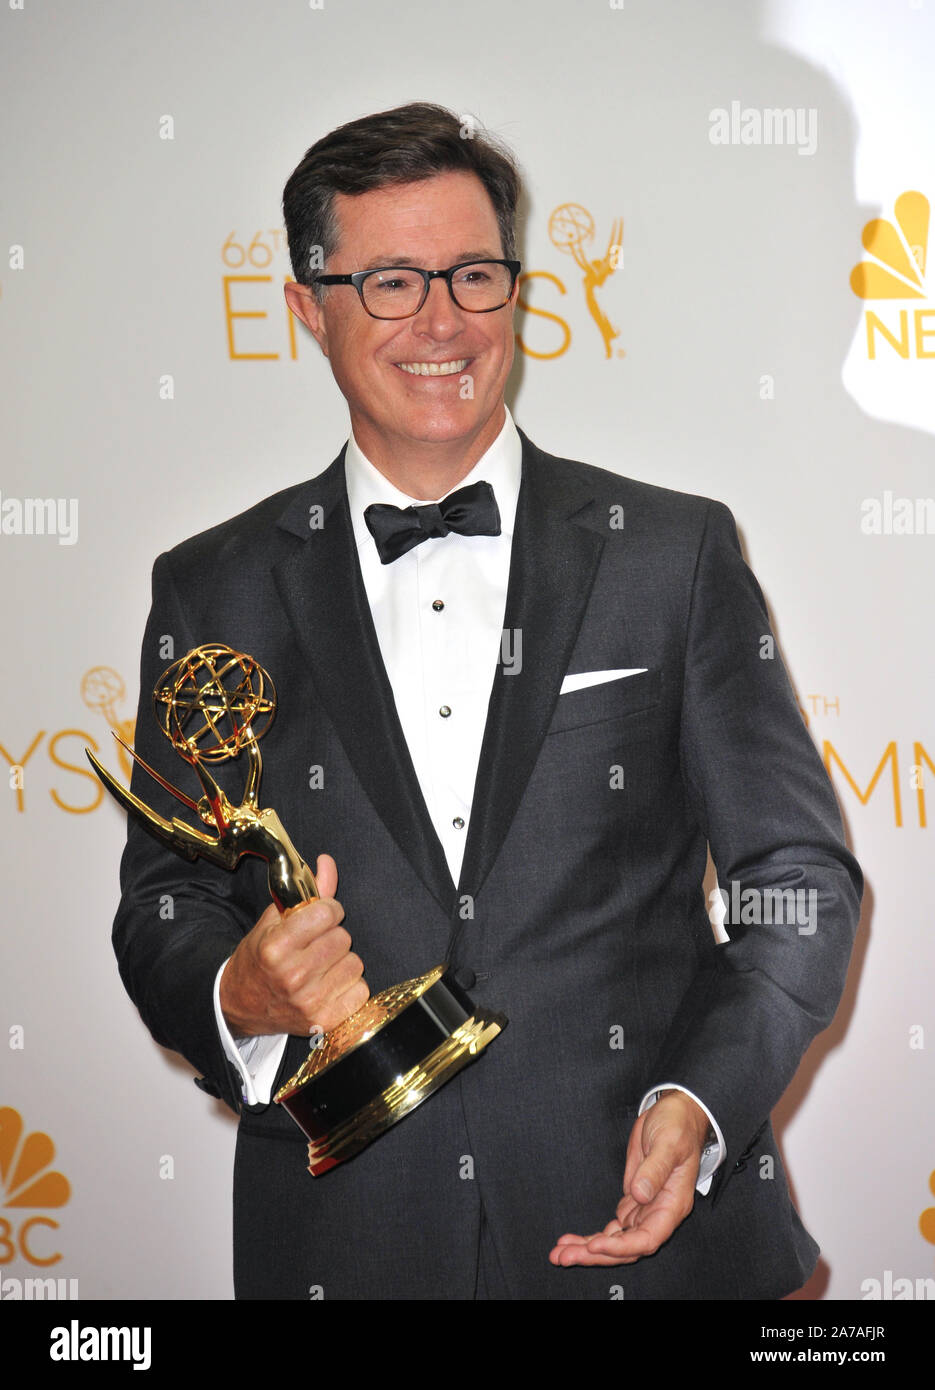 LOS ANGELES, Ca - 25. AUGUST 2014: Stephen Colbert an der 66th Primetime Emmy Awards im Nokia Theatre L.A. Live Downtown Los Angeles. © 2014 Paul Smith/Featureflash Stockfoto